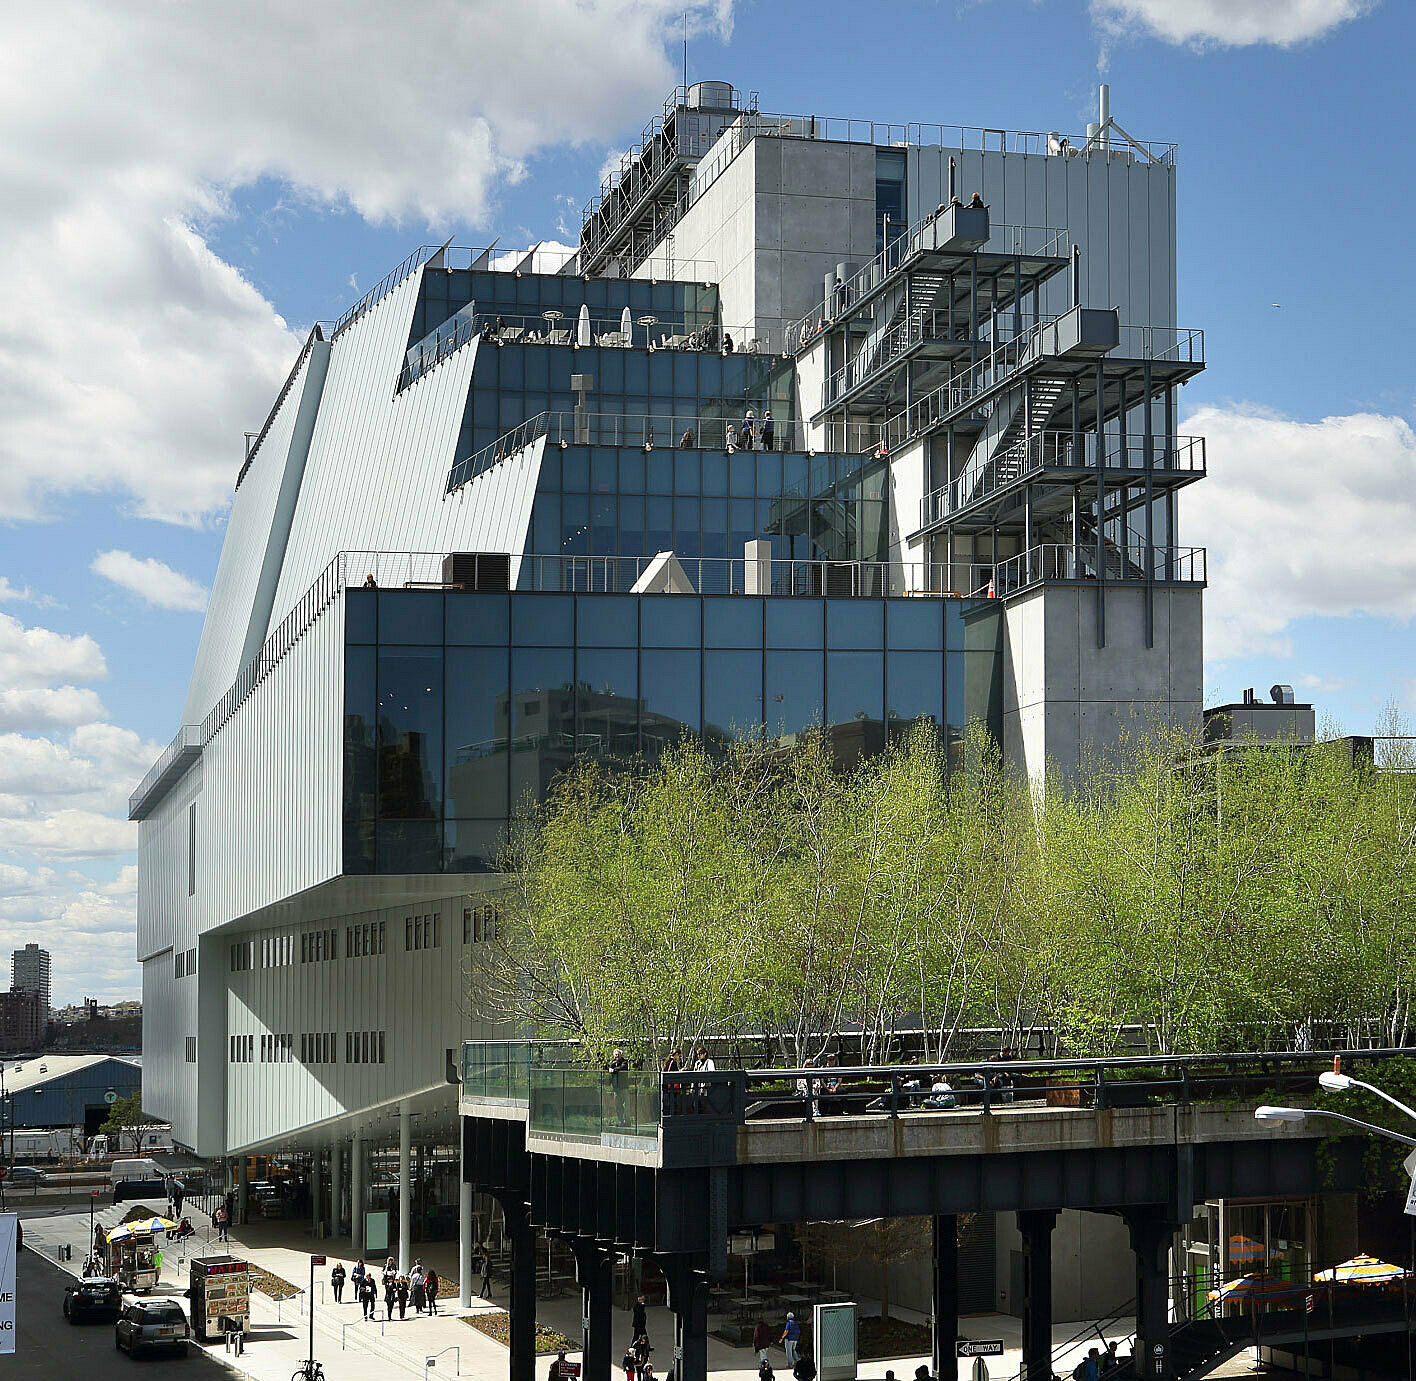 The Whitney Museum building with the High Line park in front of it